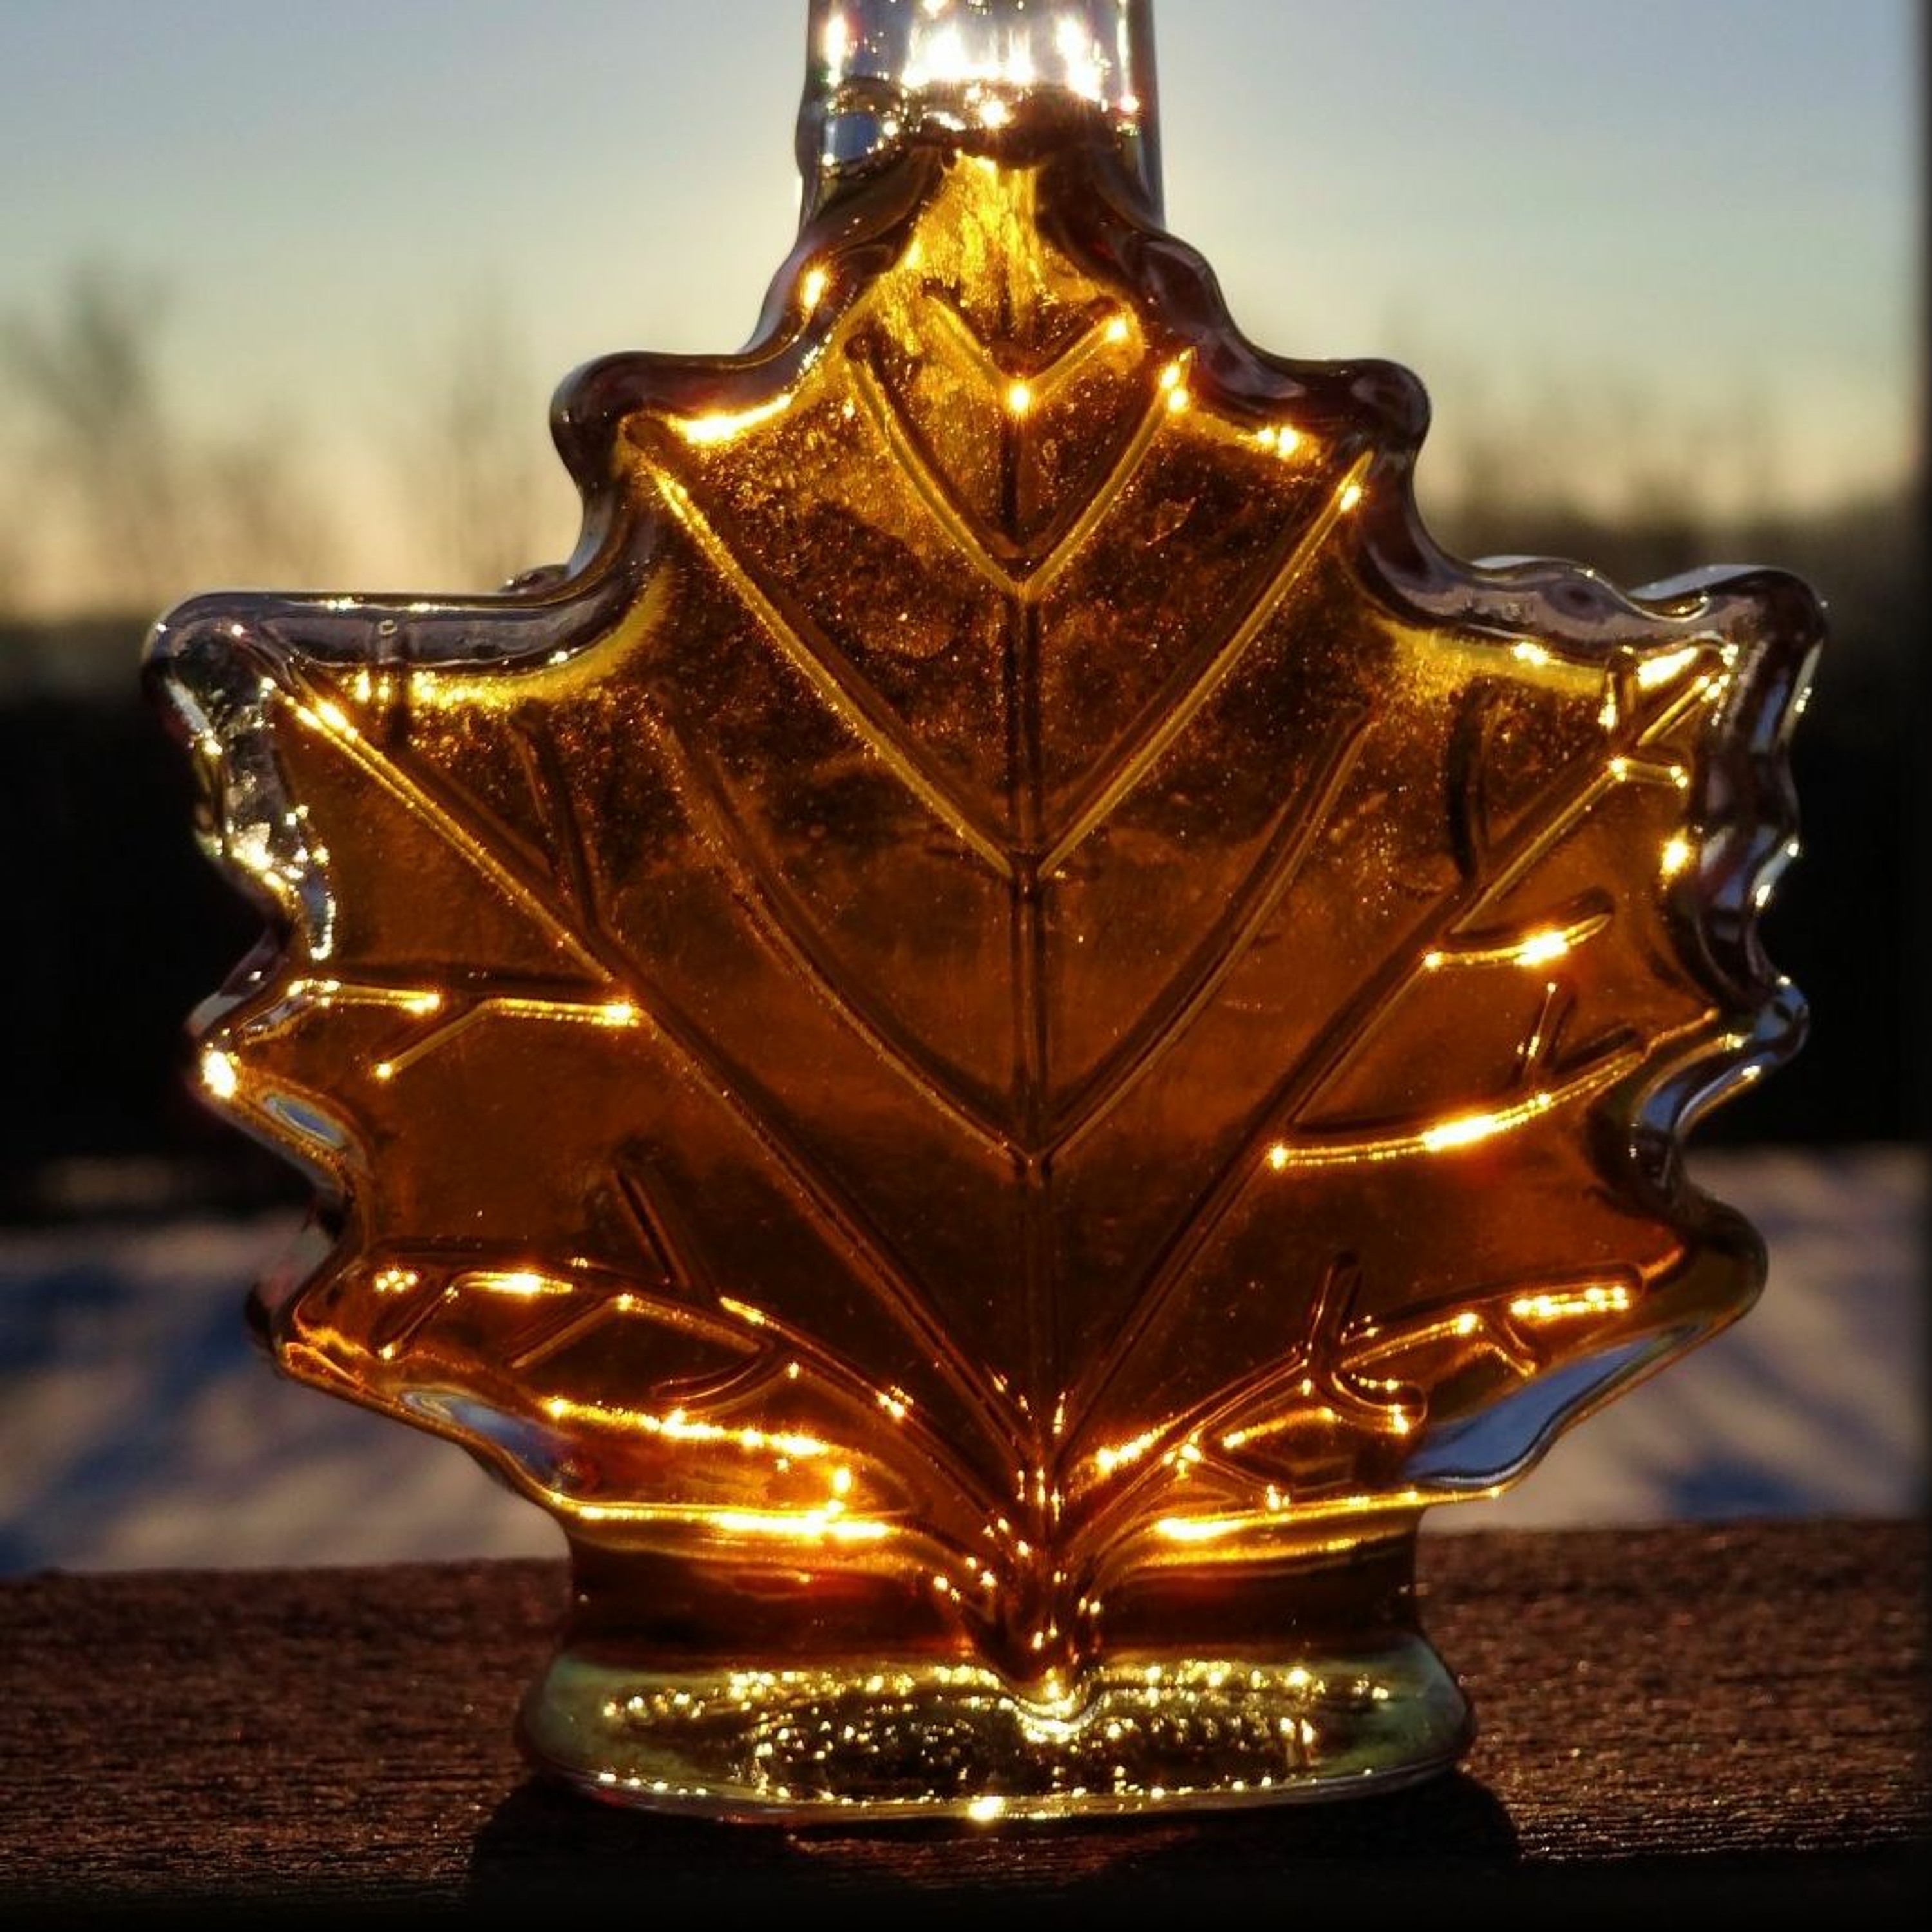 Episode 27: The Great Maple Syrup Heist (and the Theft of the BML)